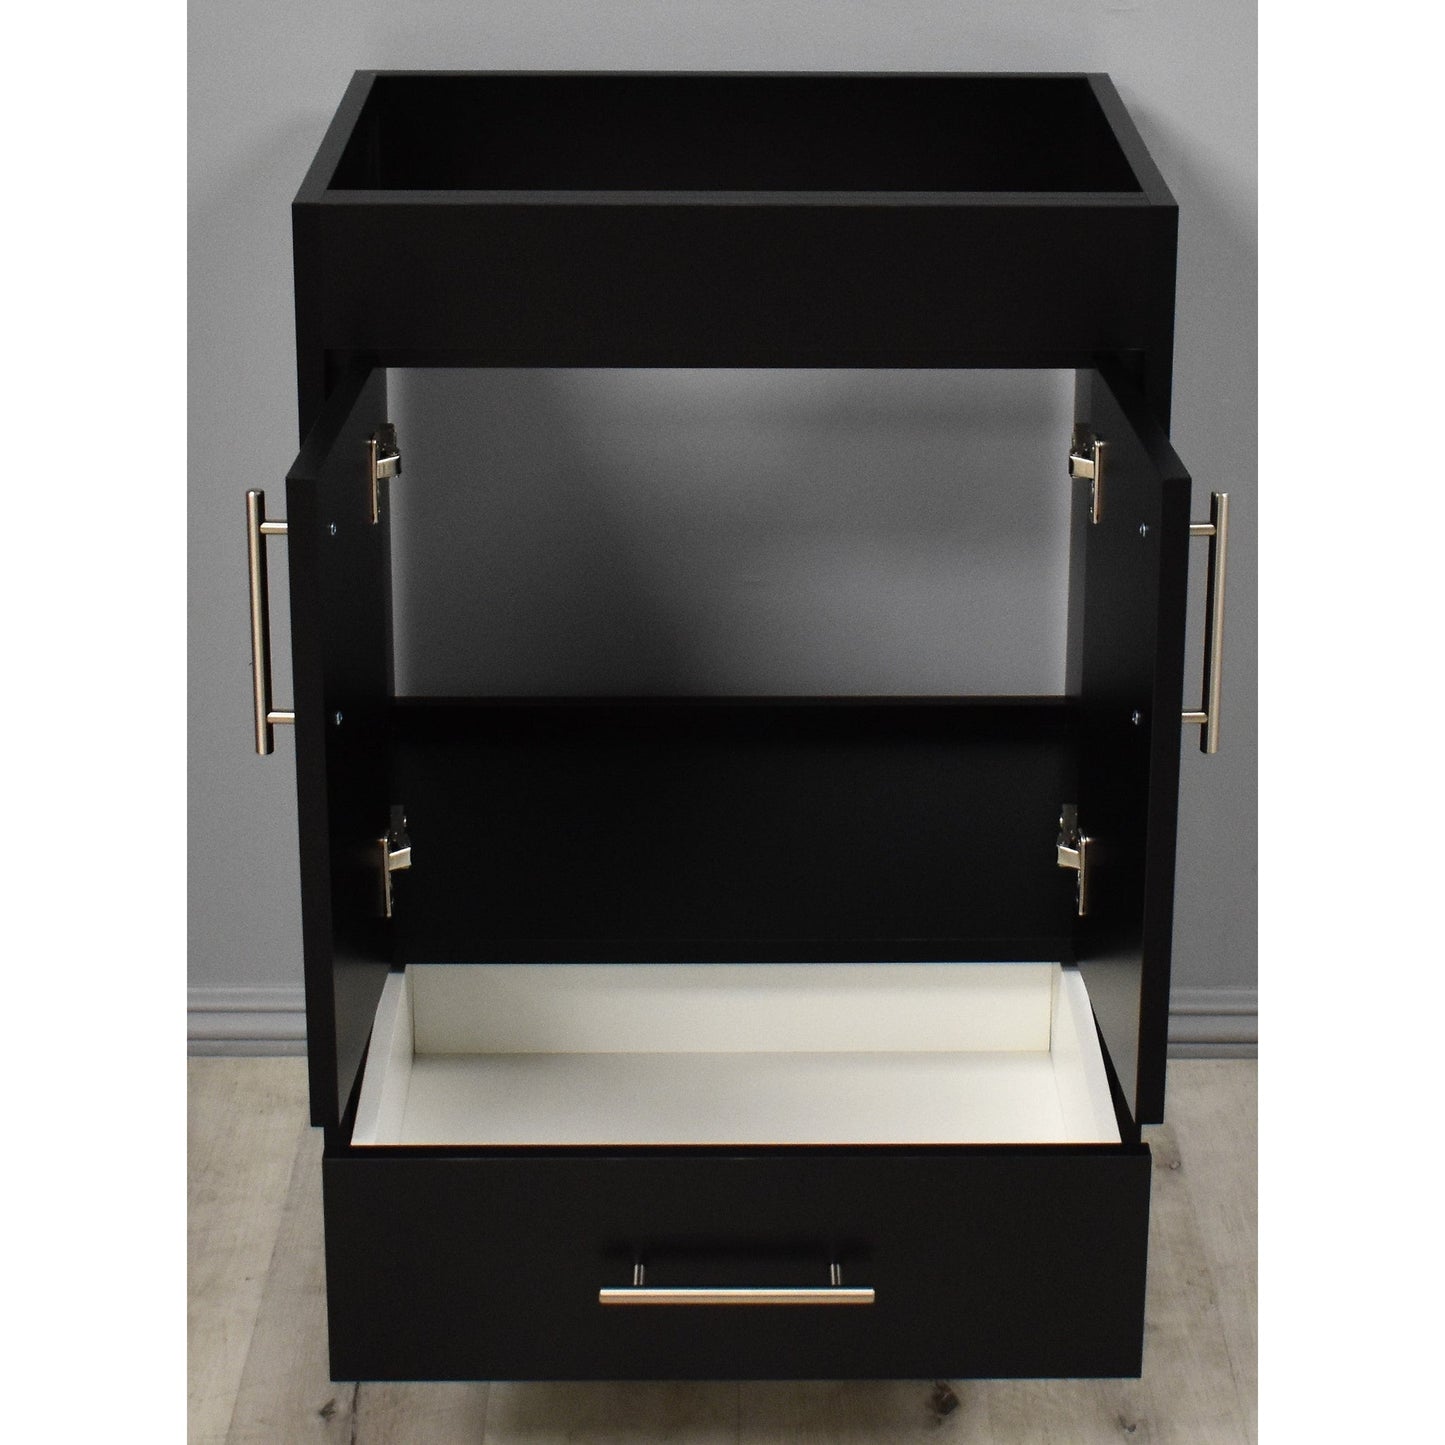 Volpa USA Pacific 24" Black Freestanding Modern Bathroom Vanity With Brushed Nickel Round Handles Cabinet Only